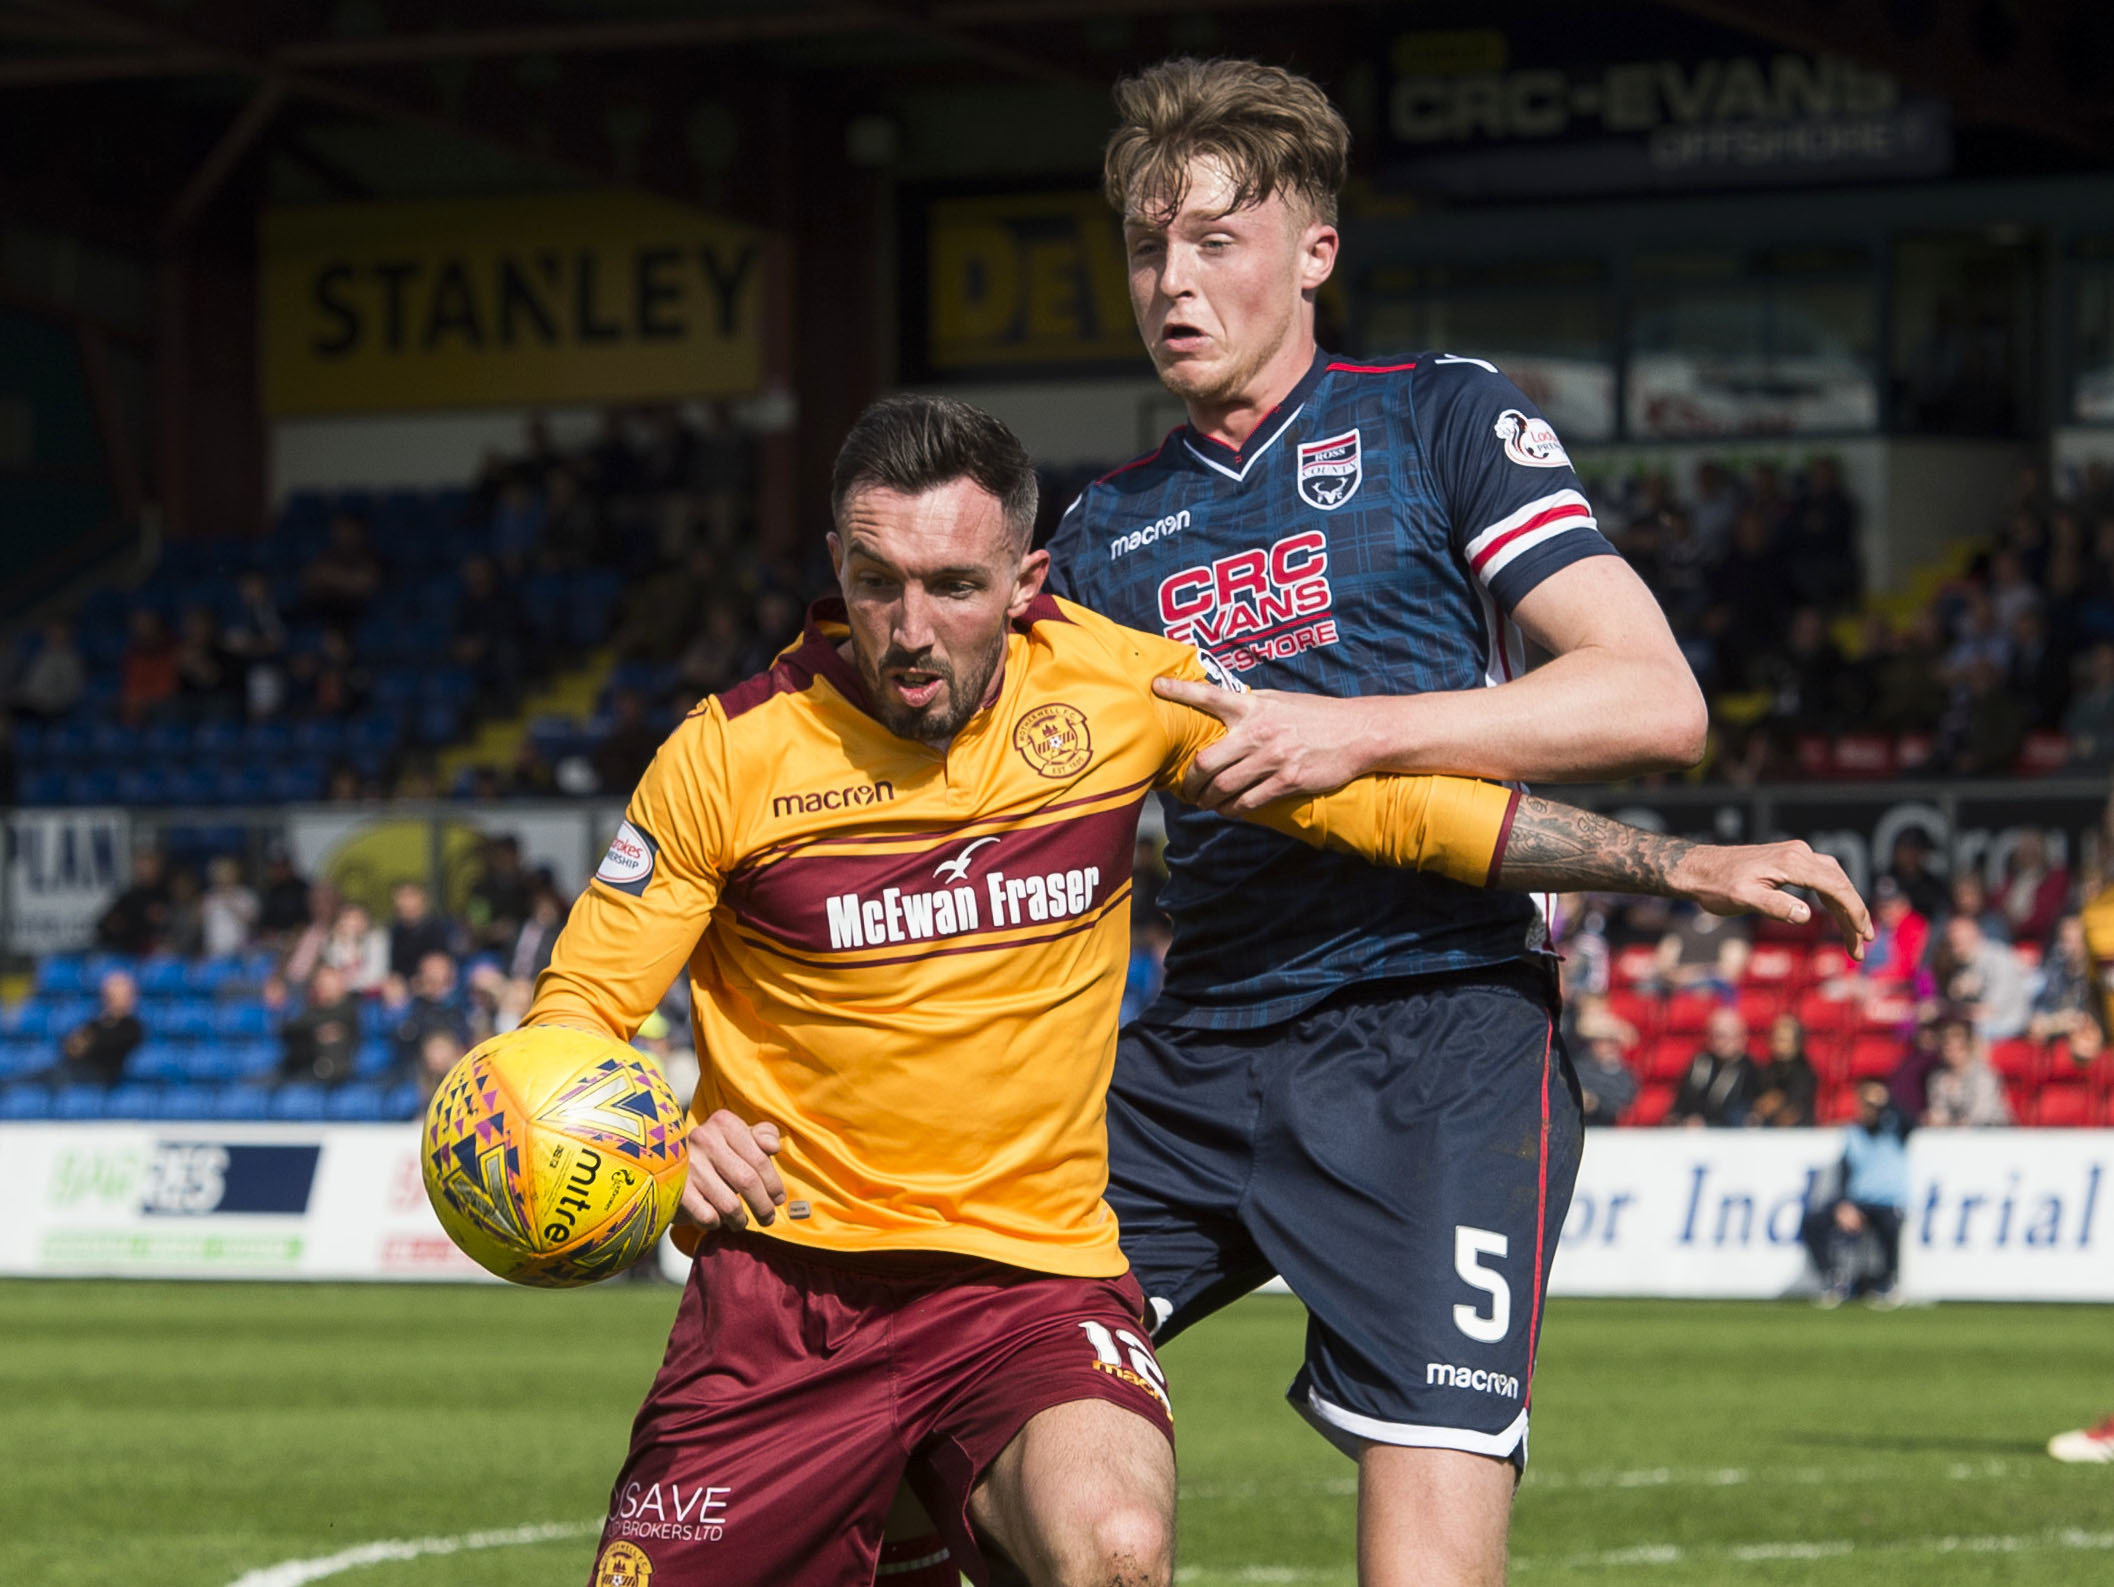 Motherwell's Ryan Bowman (L) in action against Ross Countys Harry Souttar